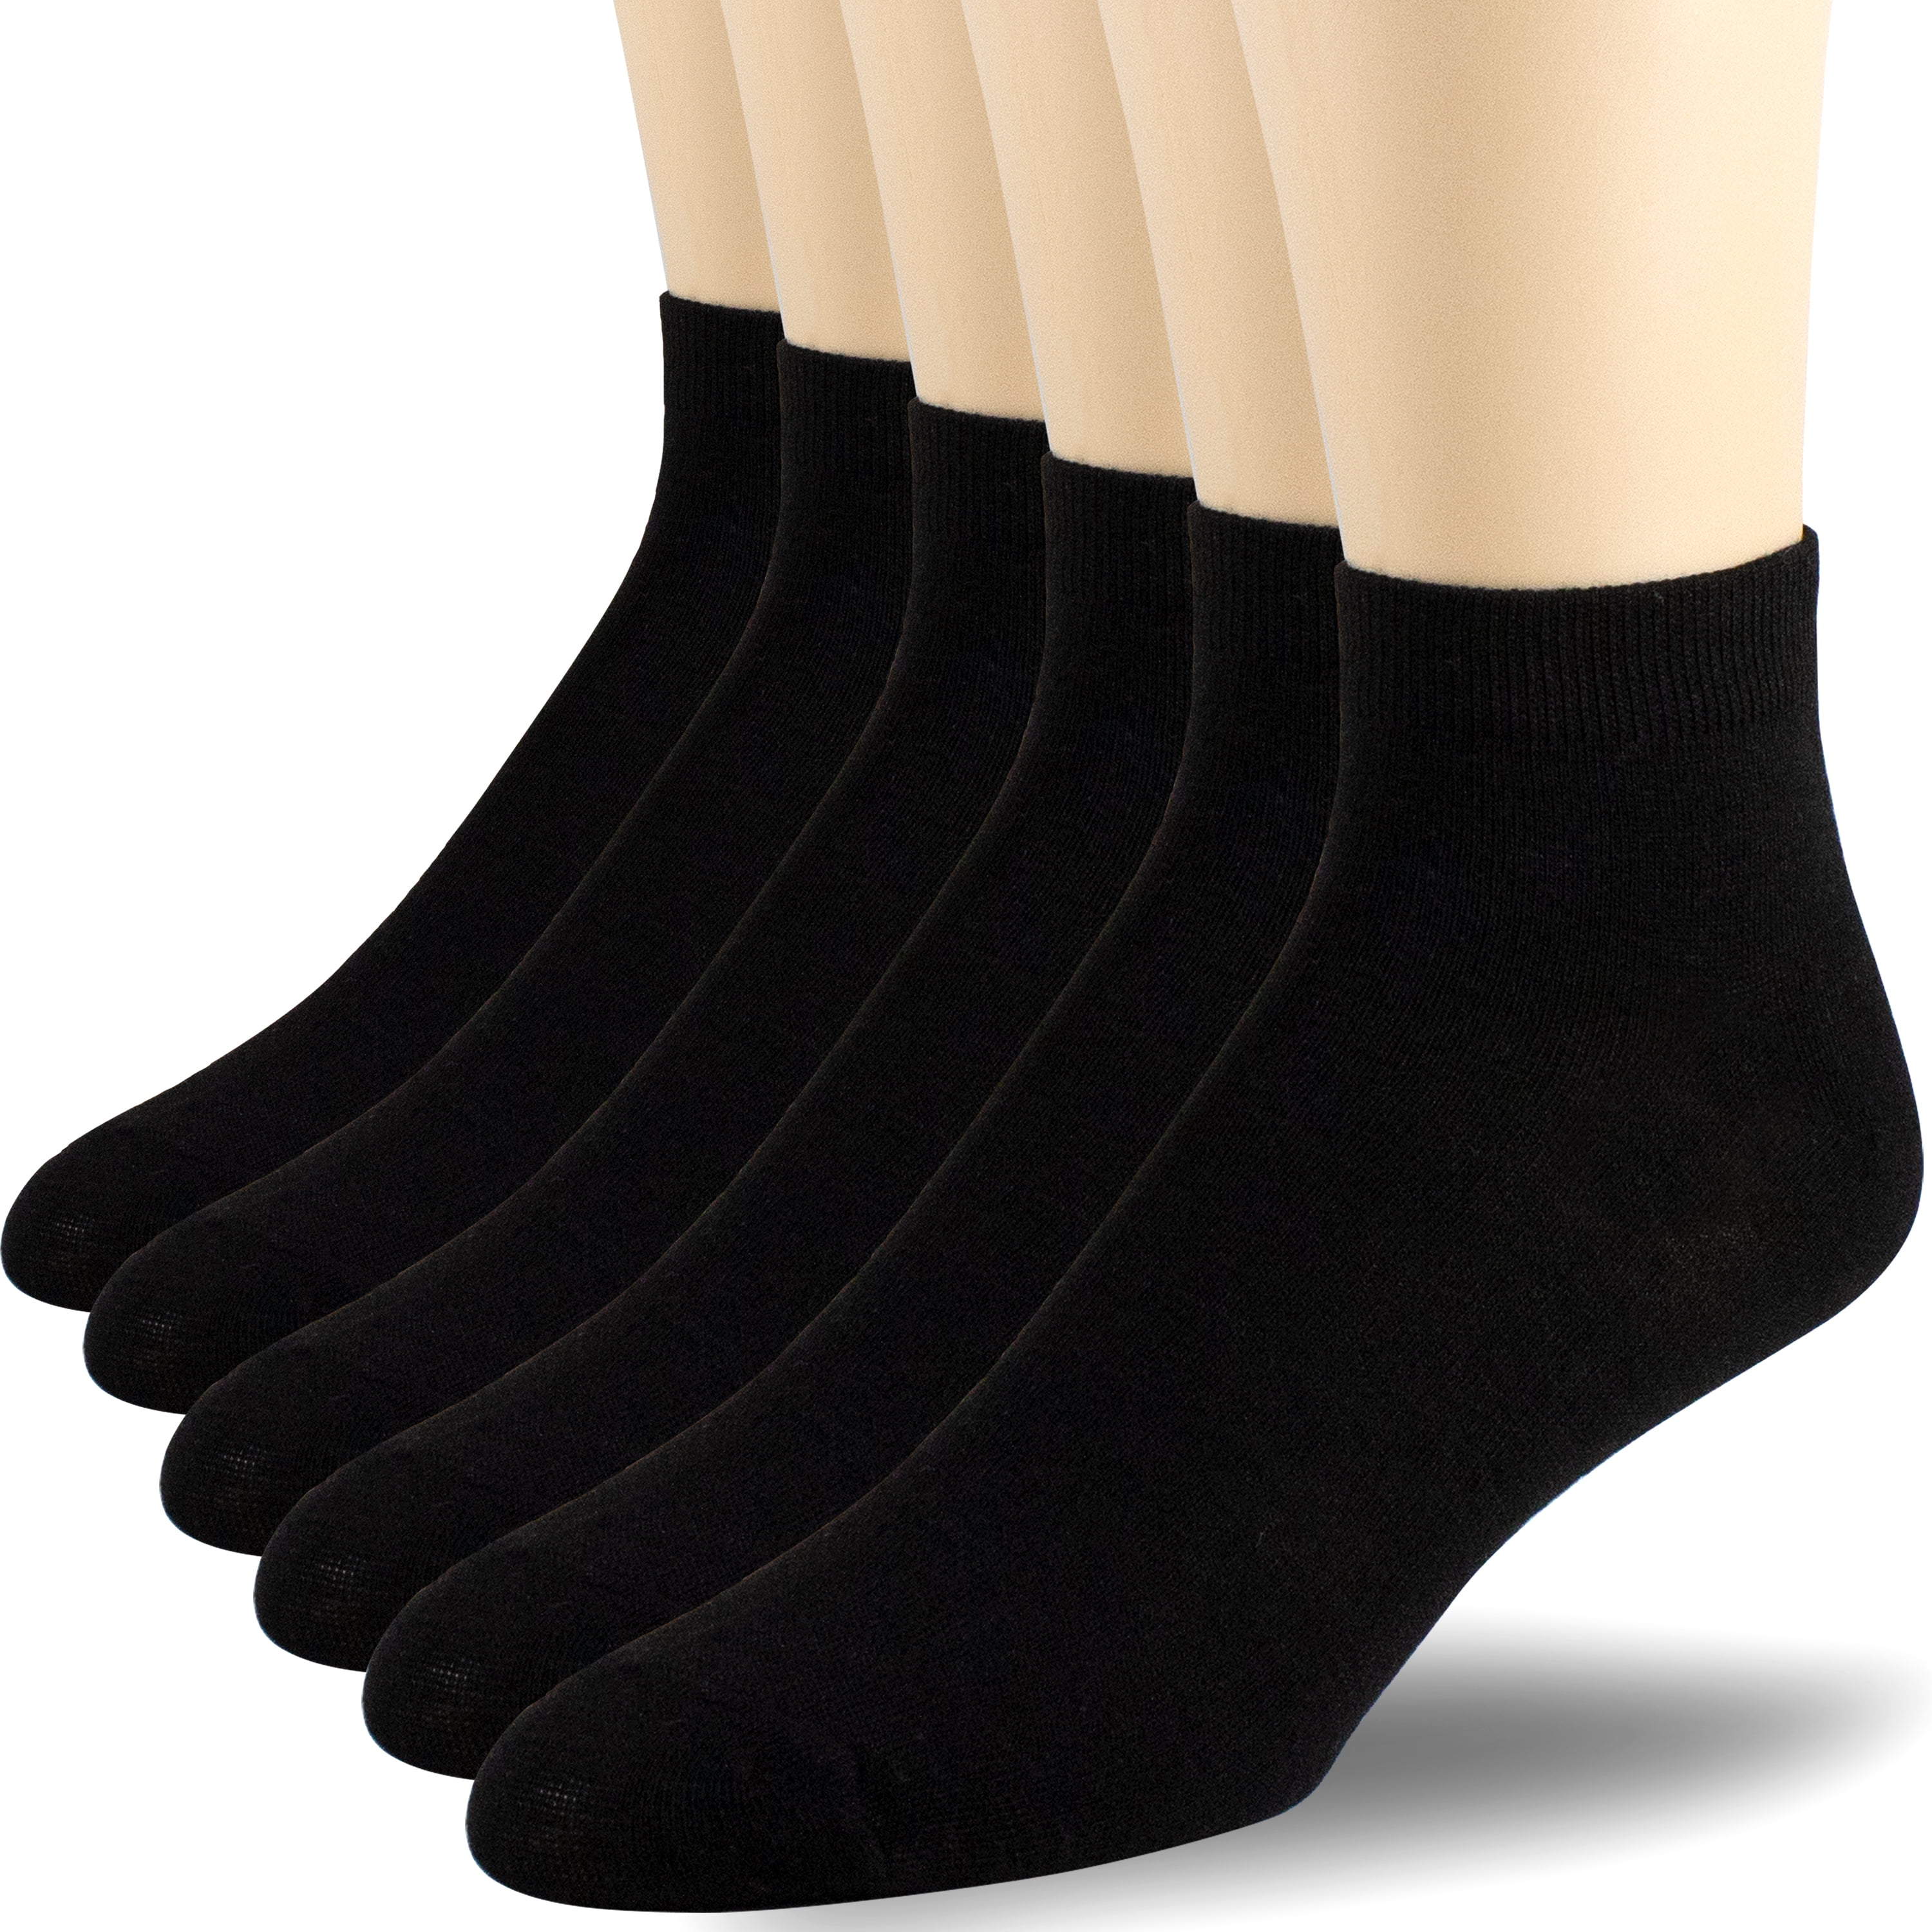 6 Pairs of Ankle Socks Warm & Comfy Cotton Casual Wear Sox Size 7-12 